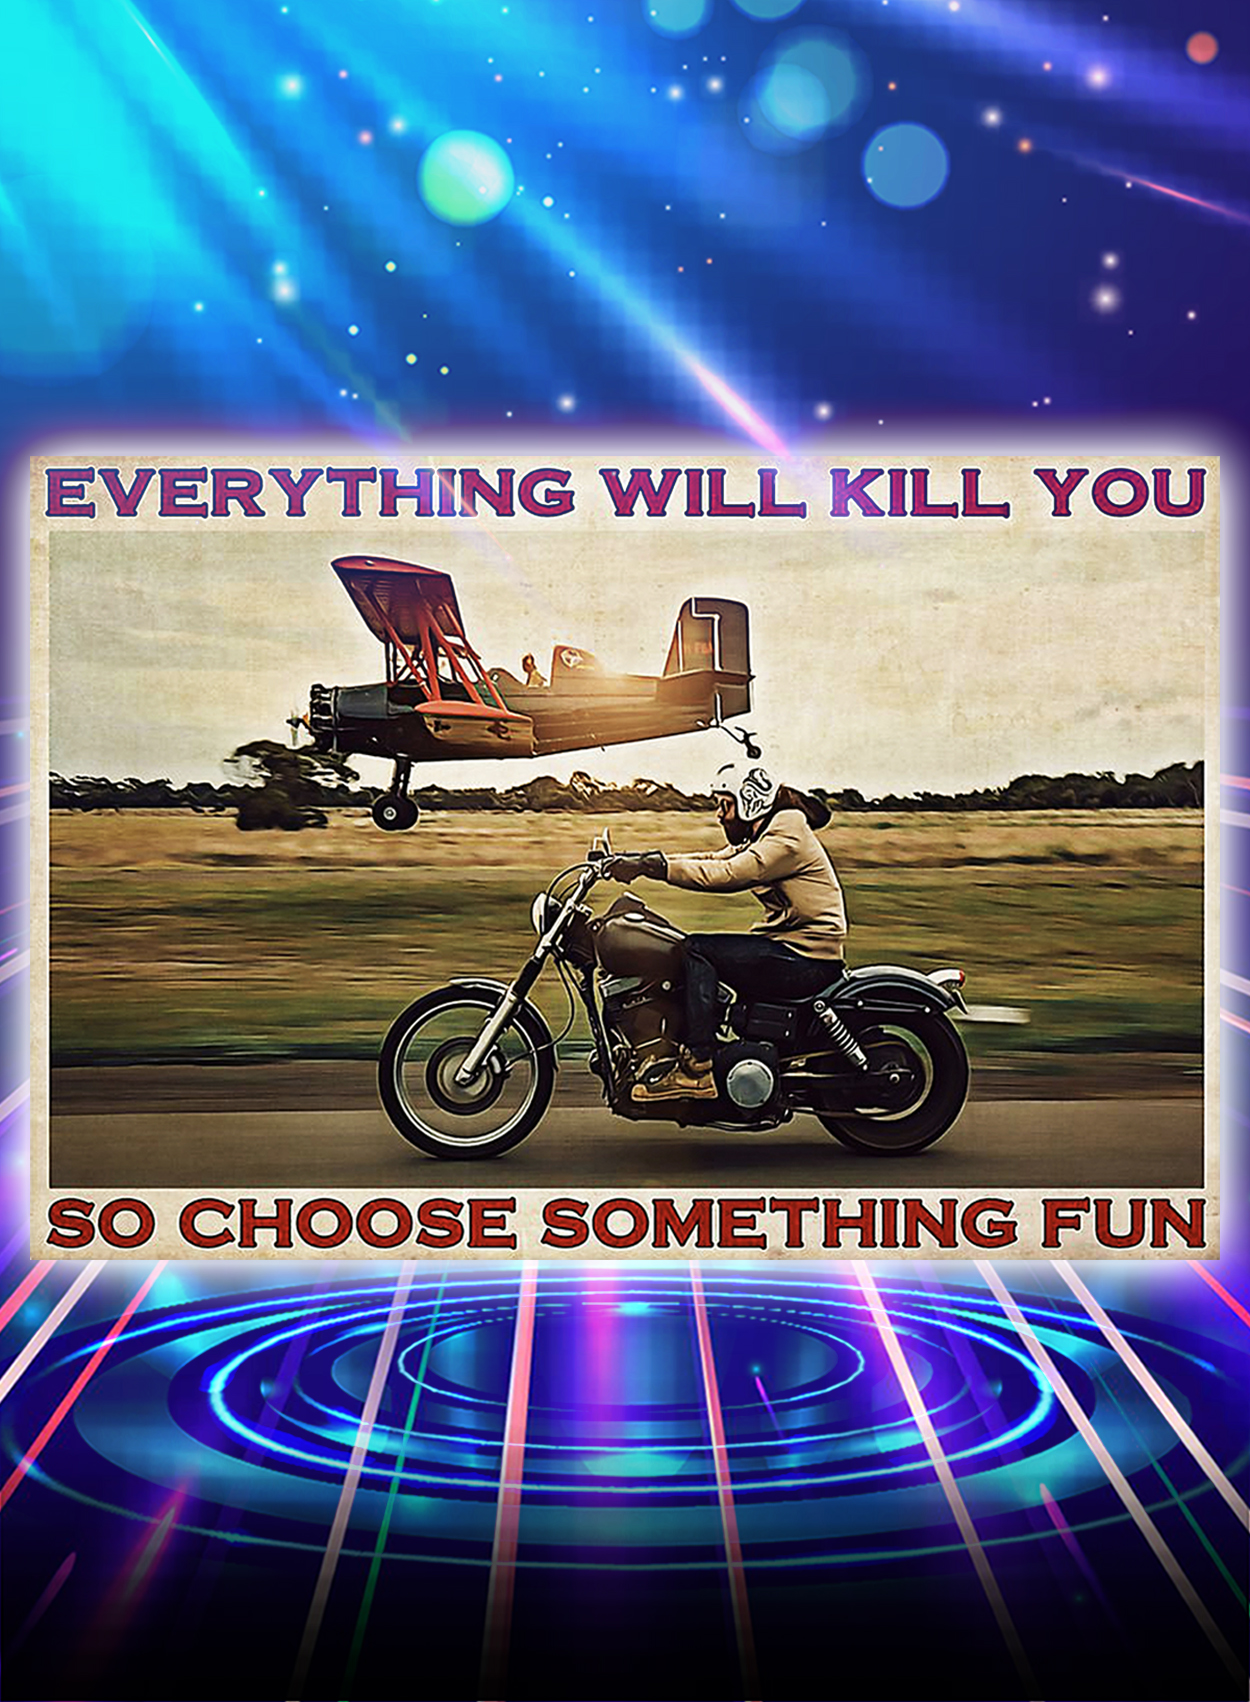 Motorbike planes everything will kill you so choose something fun poster - A3